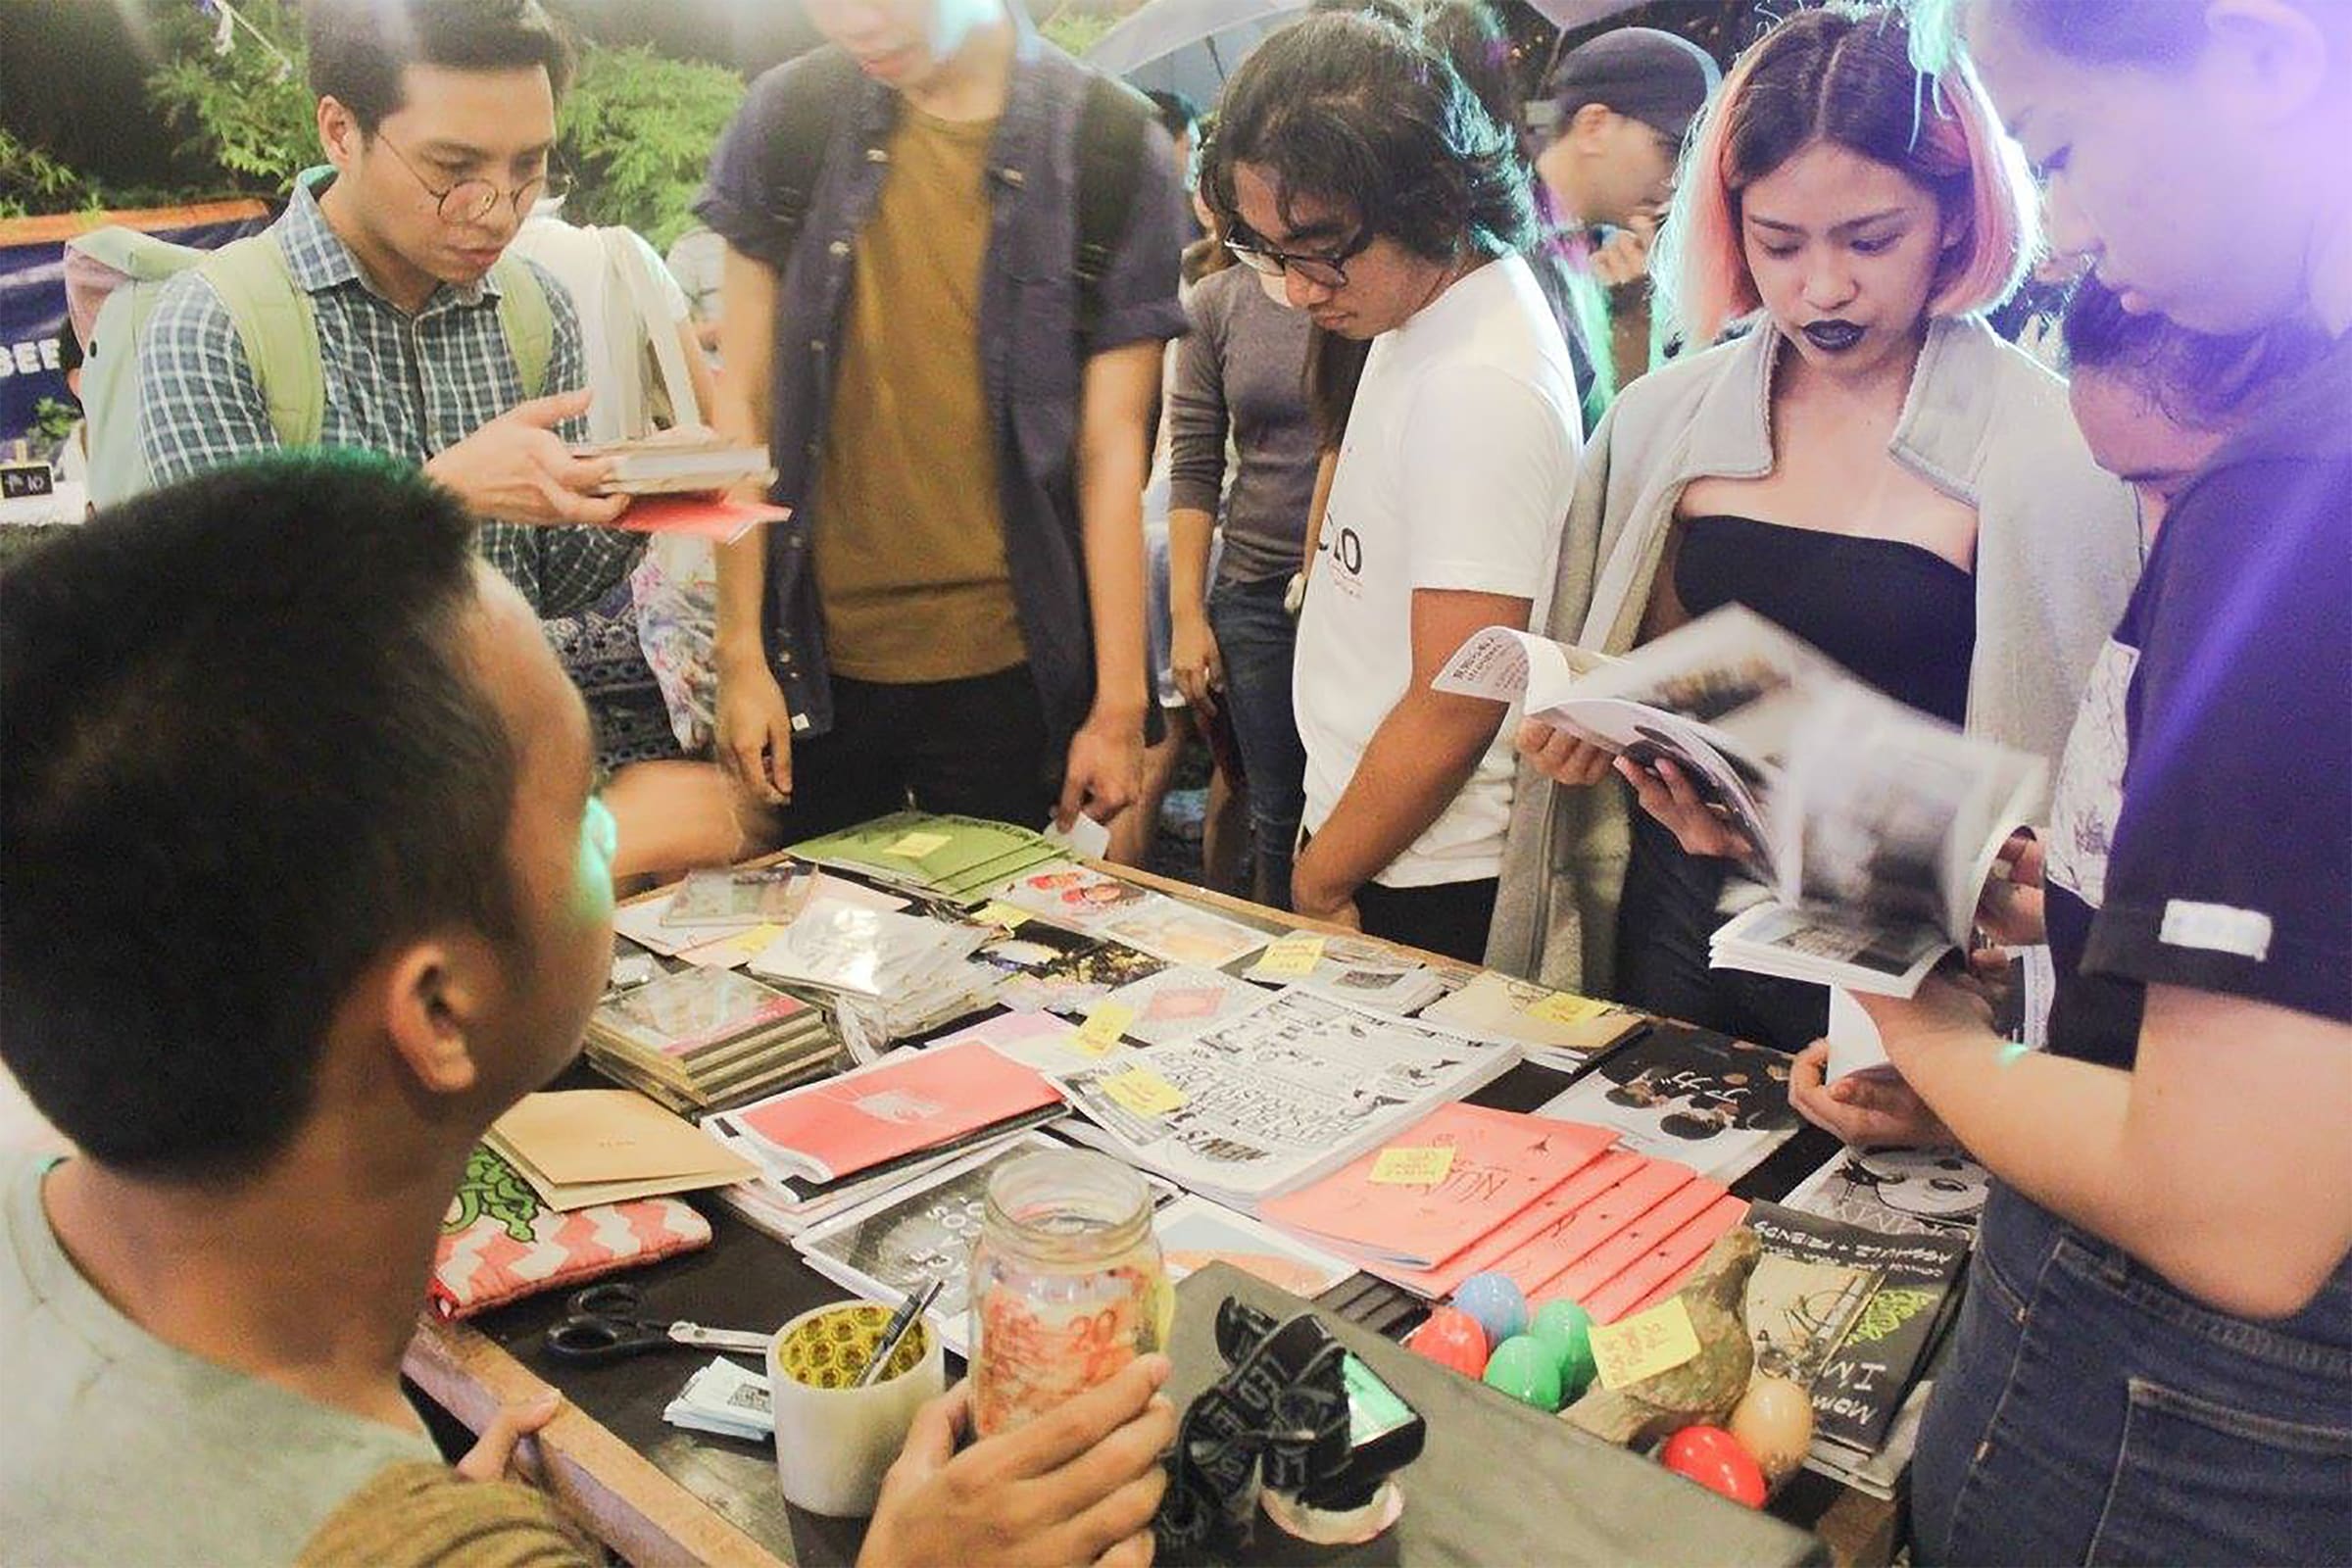 A moment during a ‘zine orgy’. Photograph by UP Photographers' Society. Courtesy of Mac Andre Arboleda.